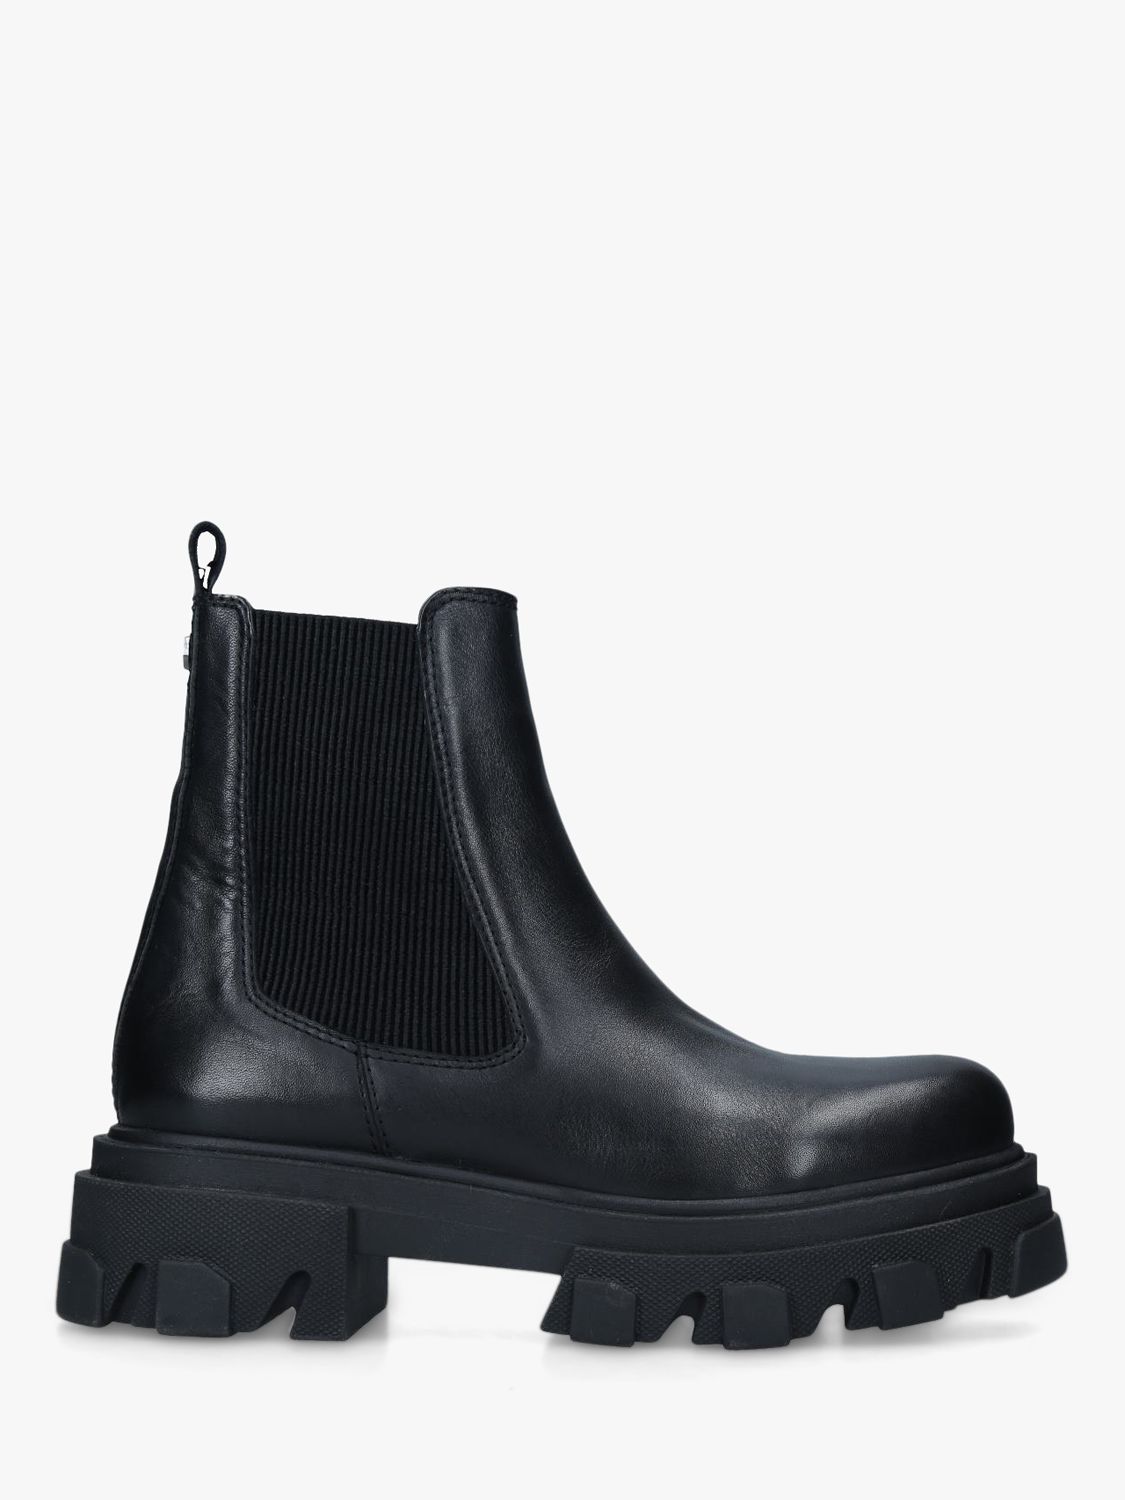 Carvela Shy Leather Chunky Sole Boots, Black at John Lewis & Partners